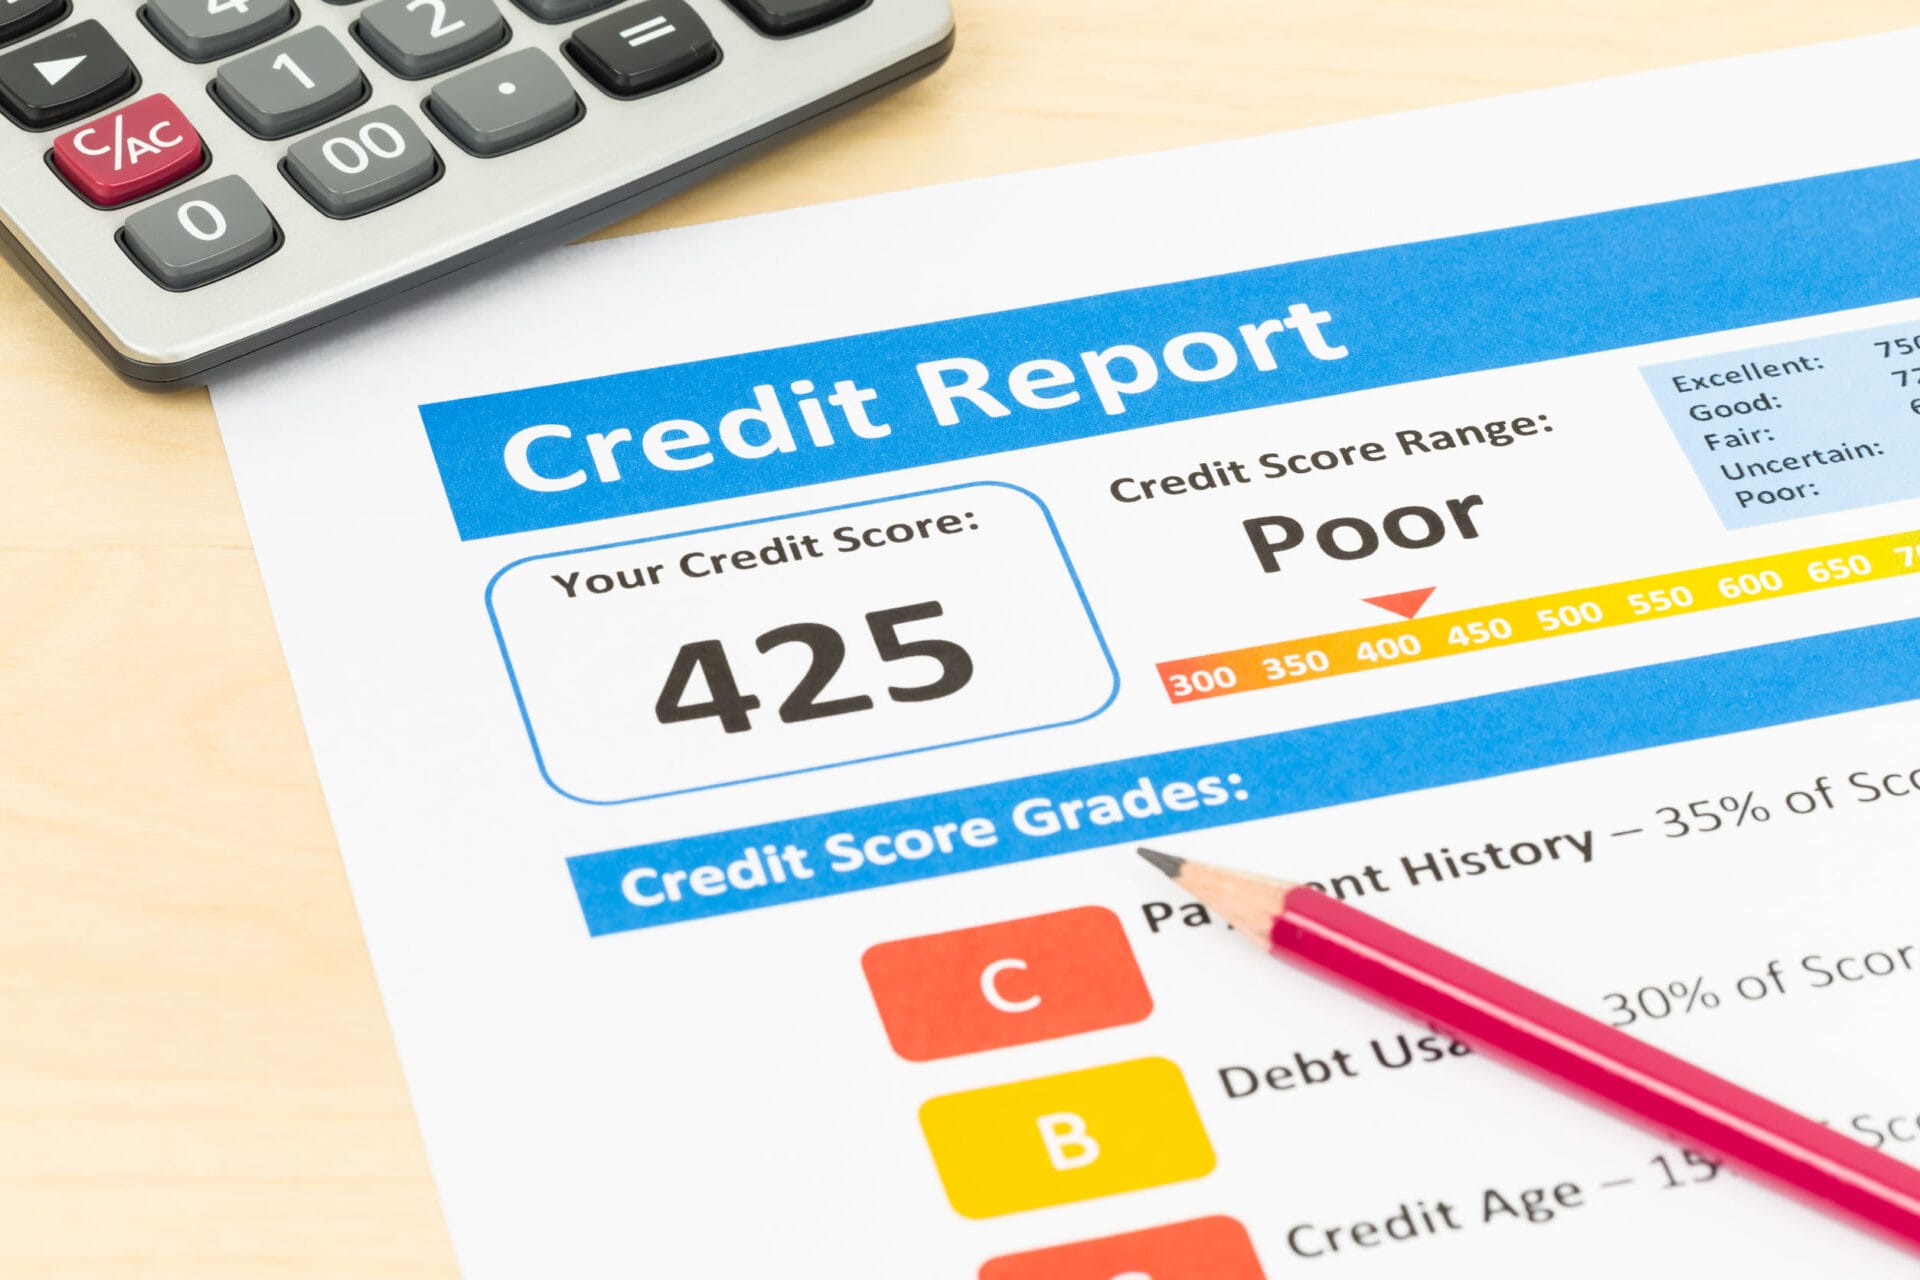 Poor credit score report with pen and calculator